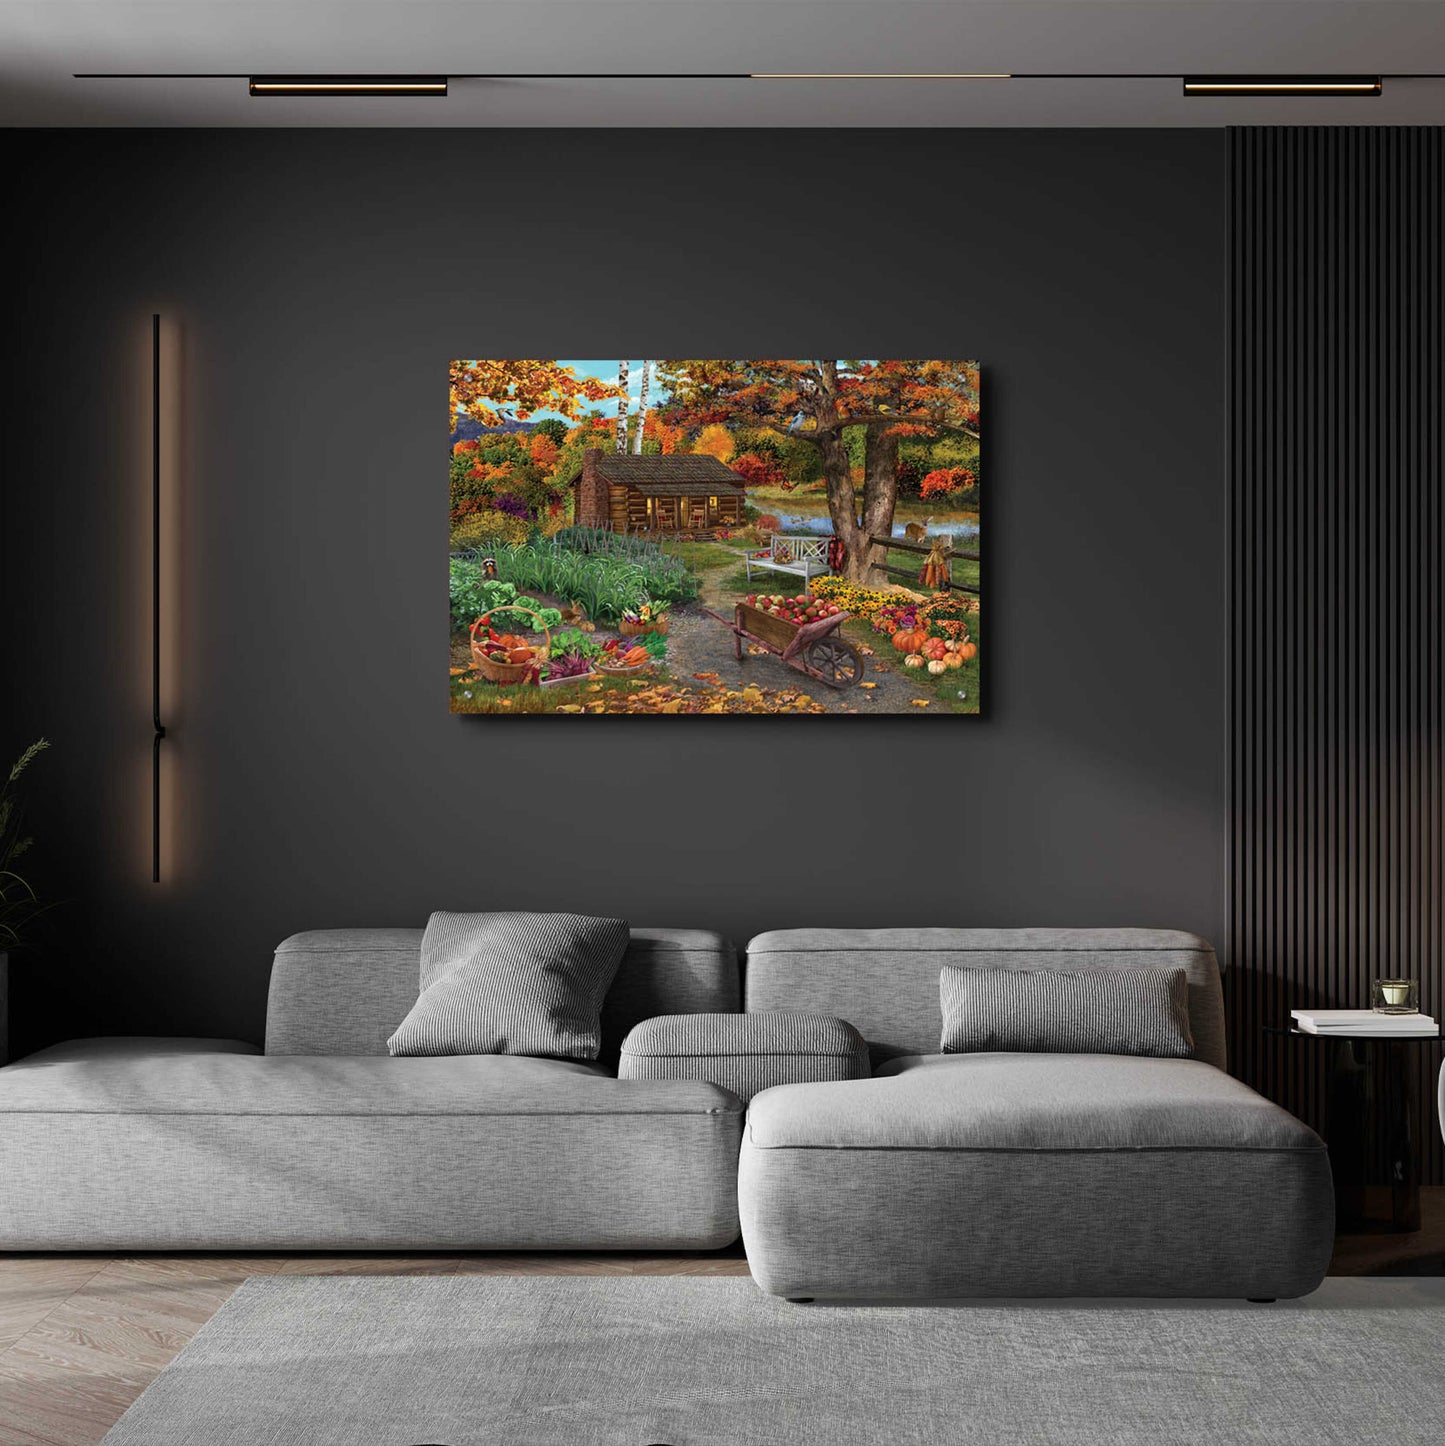 Epic Art 'Harvest at the Cabin' by Bigelow Illustrations, Acrylic Glass Wall Art,36x24